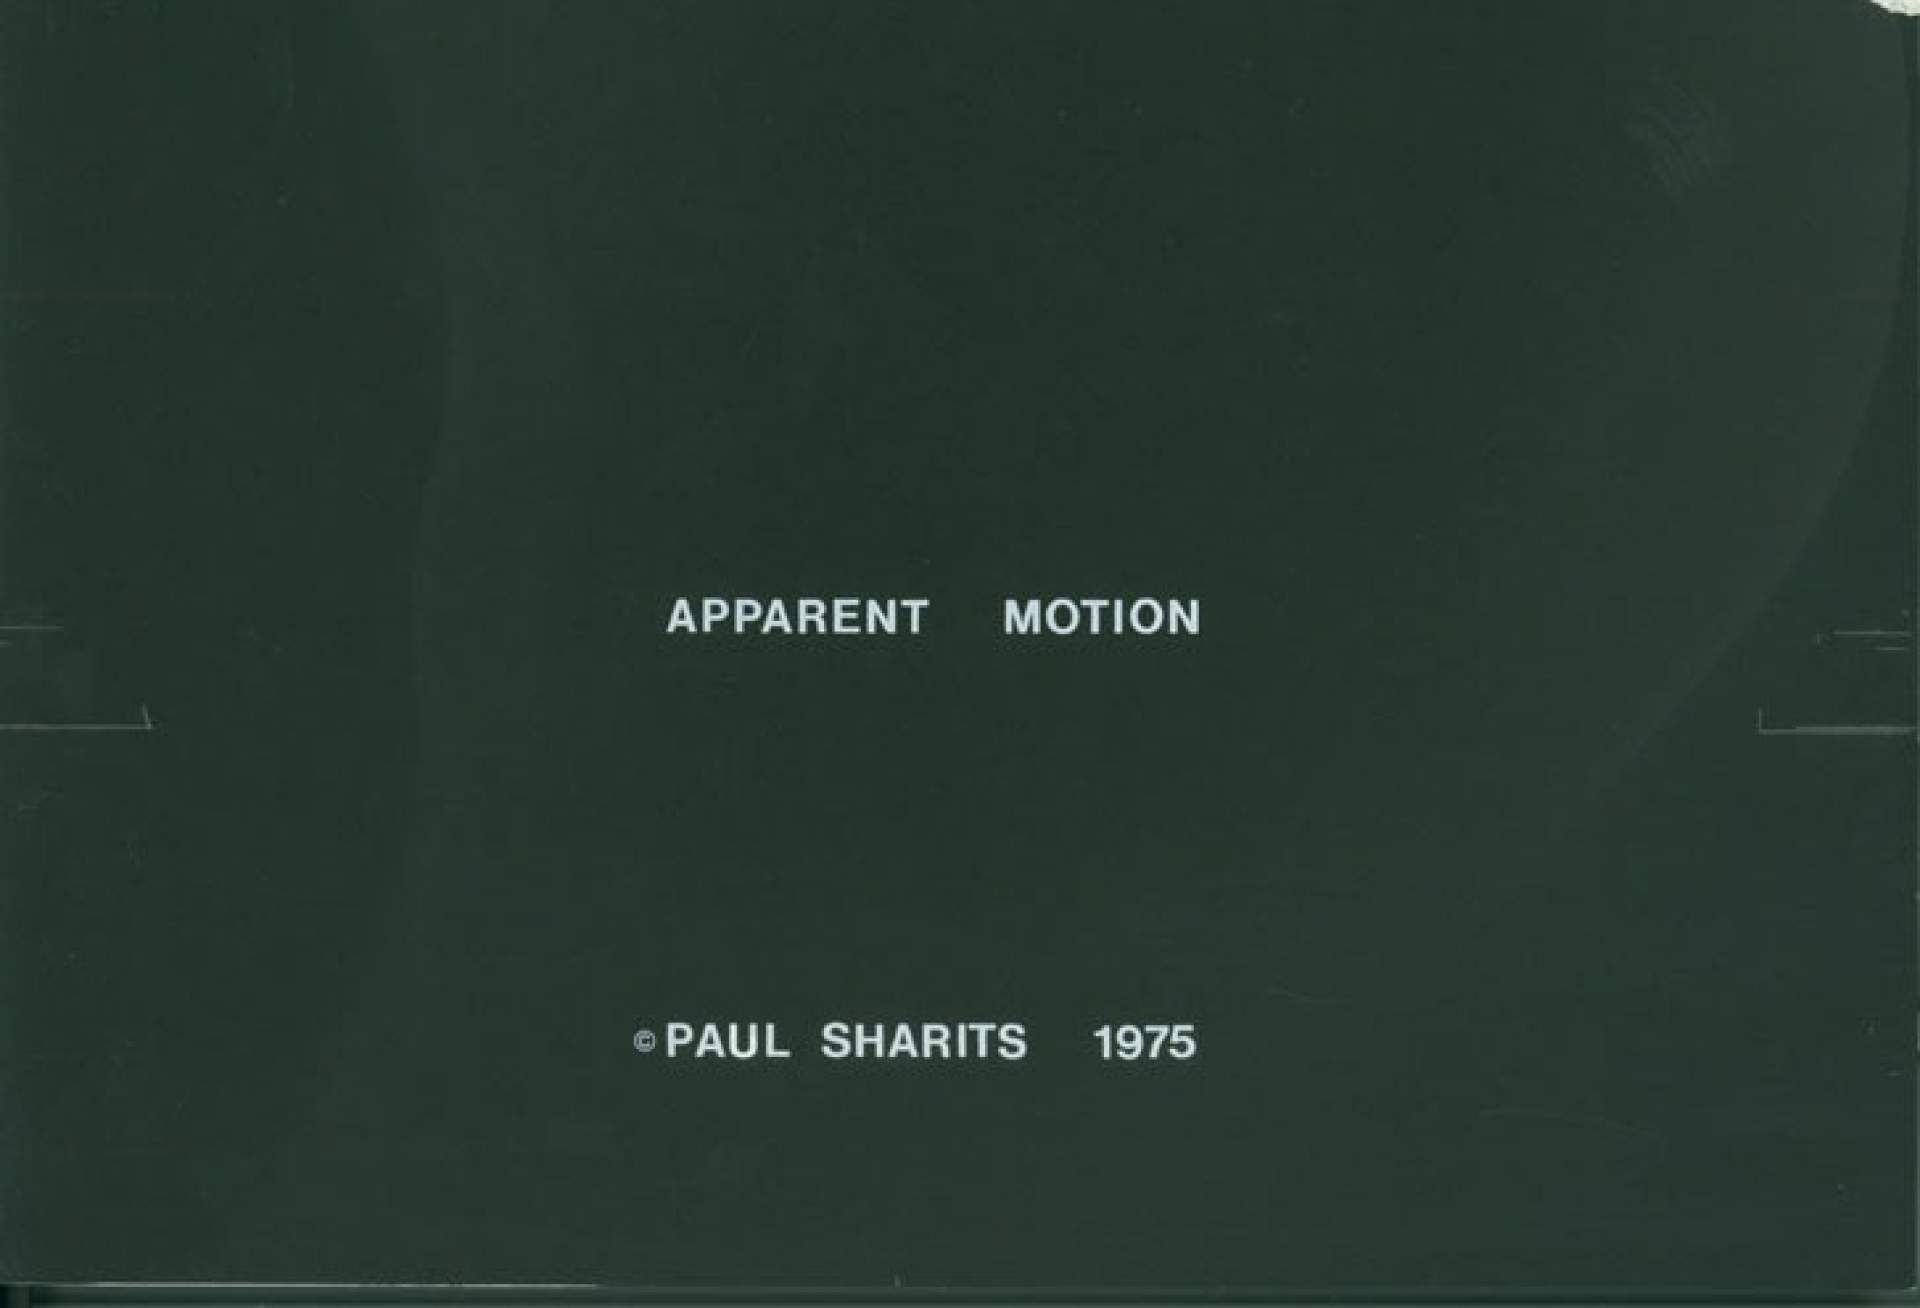 Untitled (Apparent Motion)